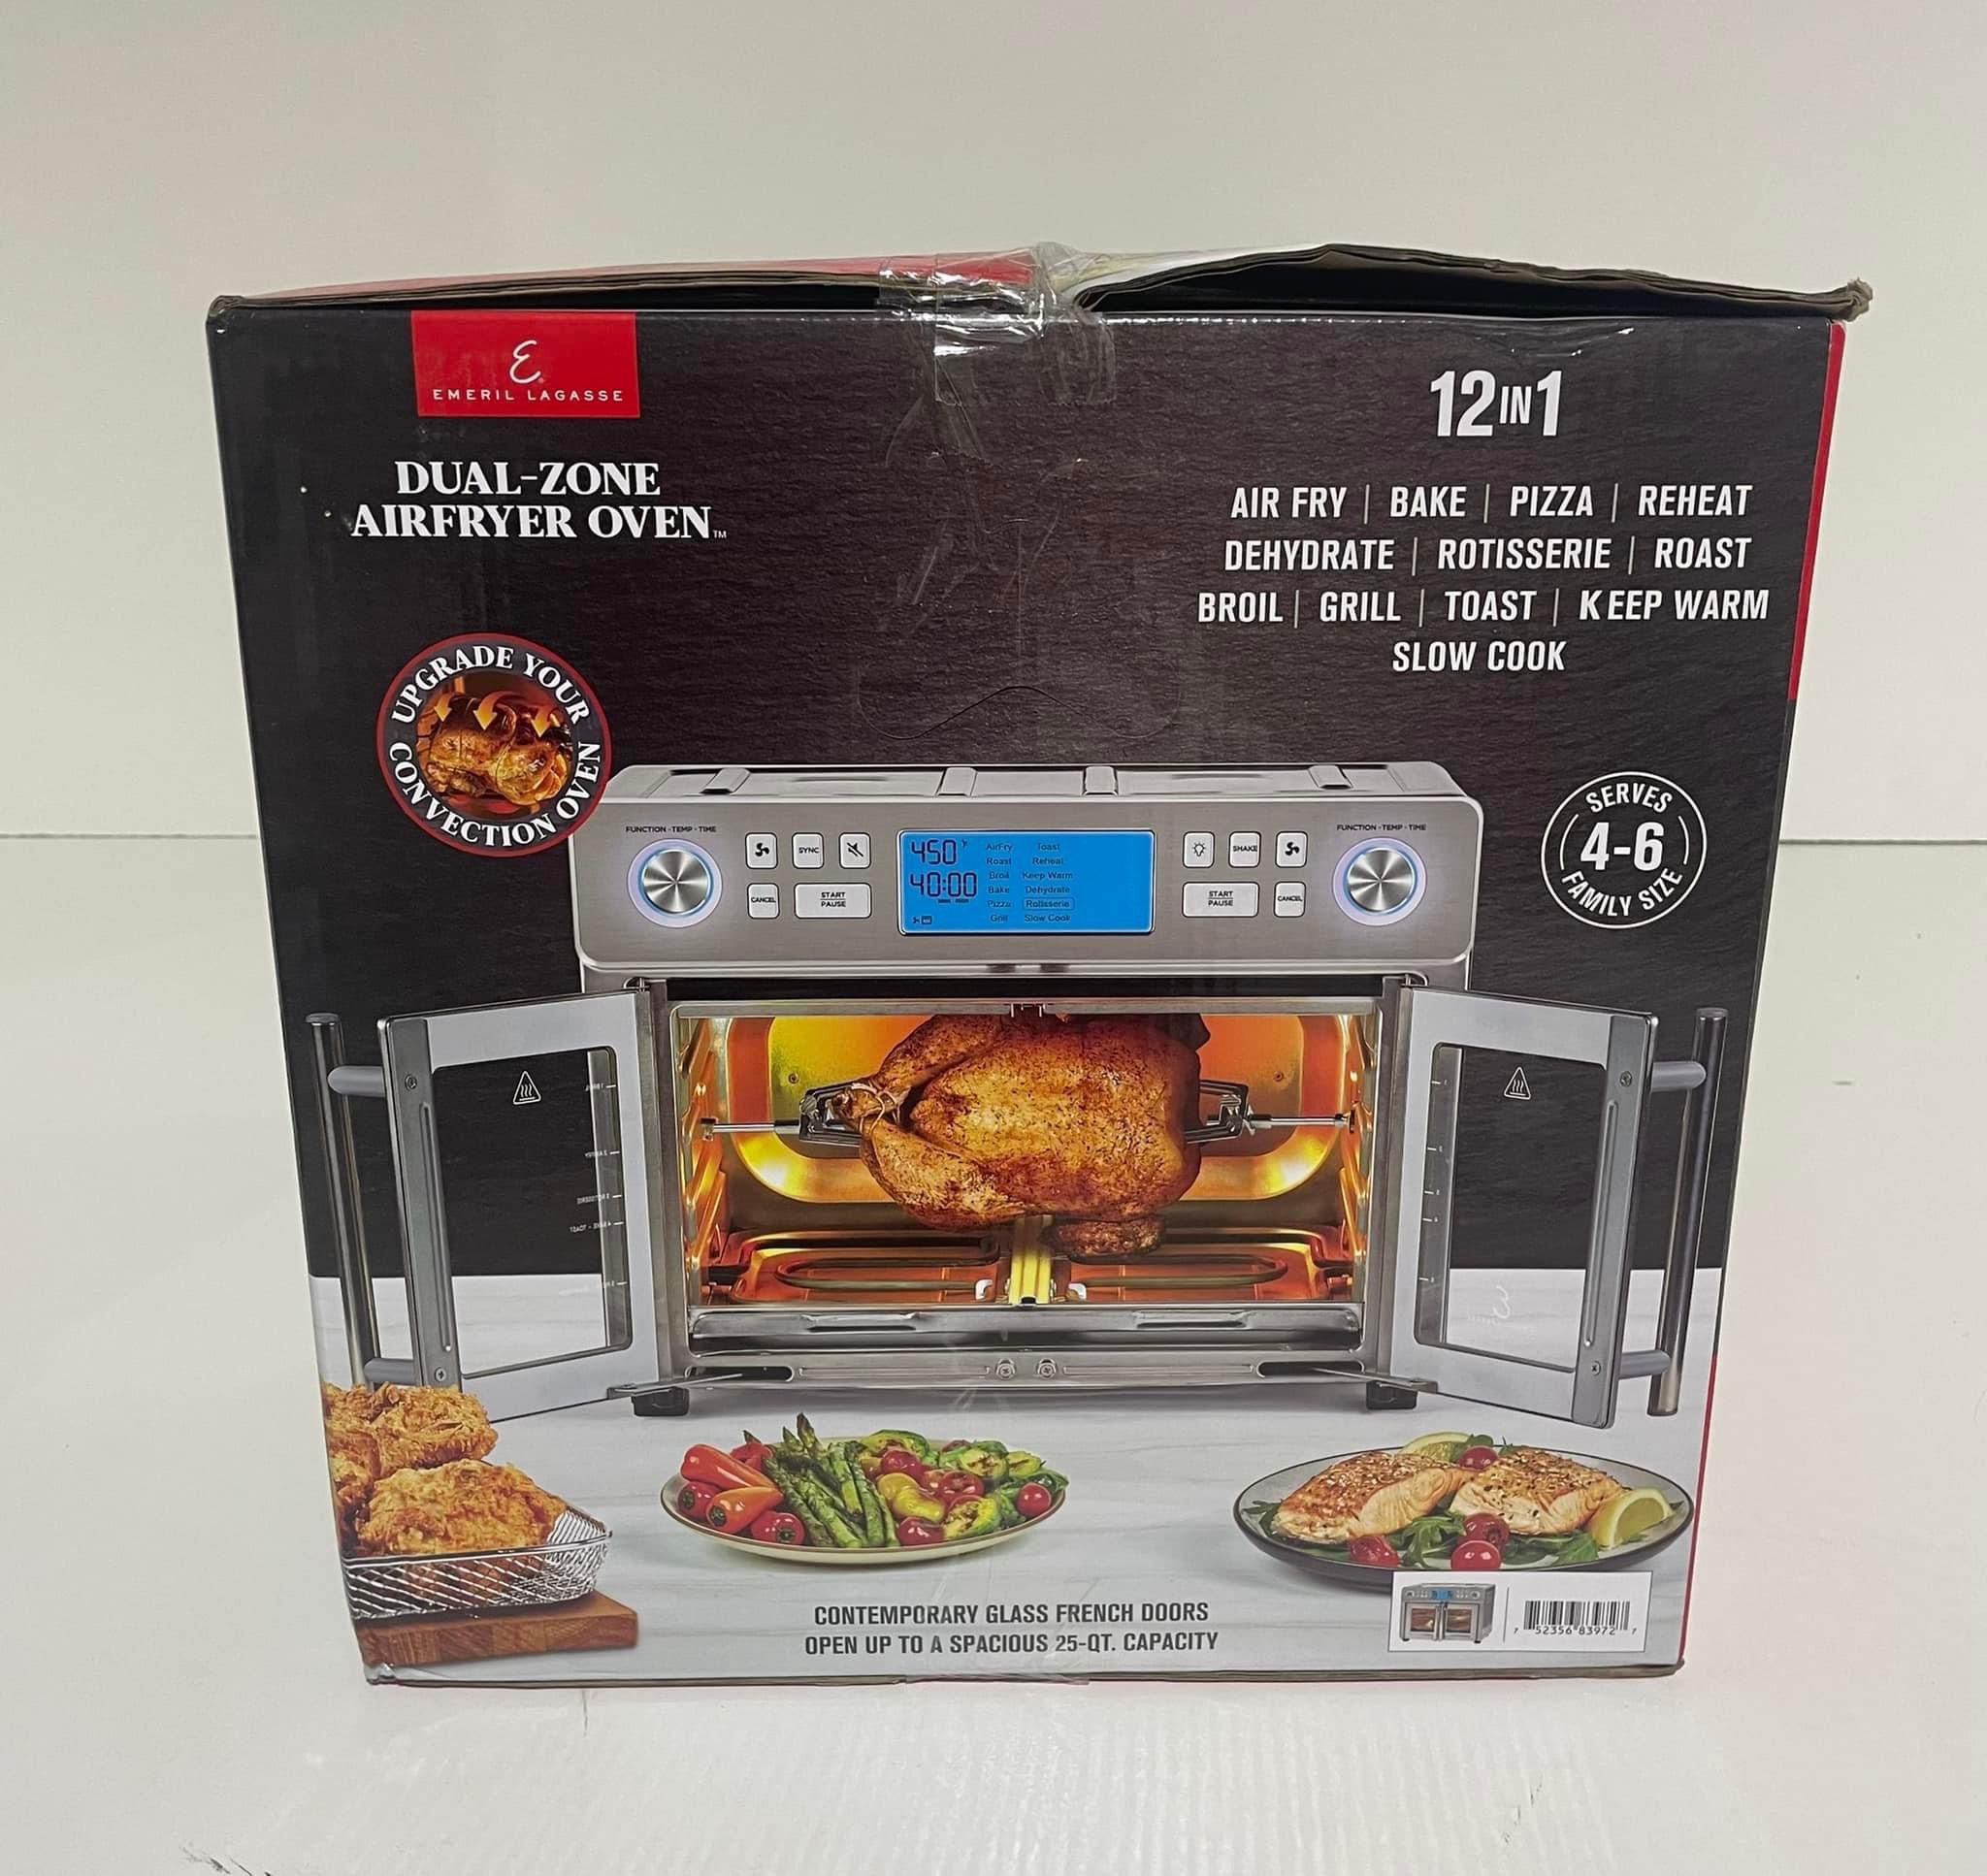 Emeril Lagasse Dual-Zone AirFryer Oven (1 Payment)